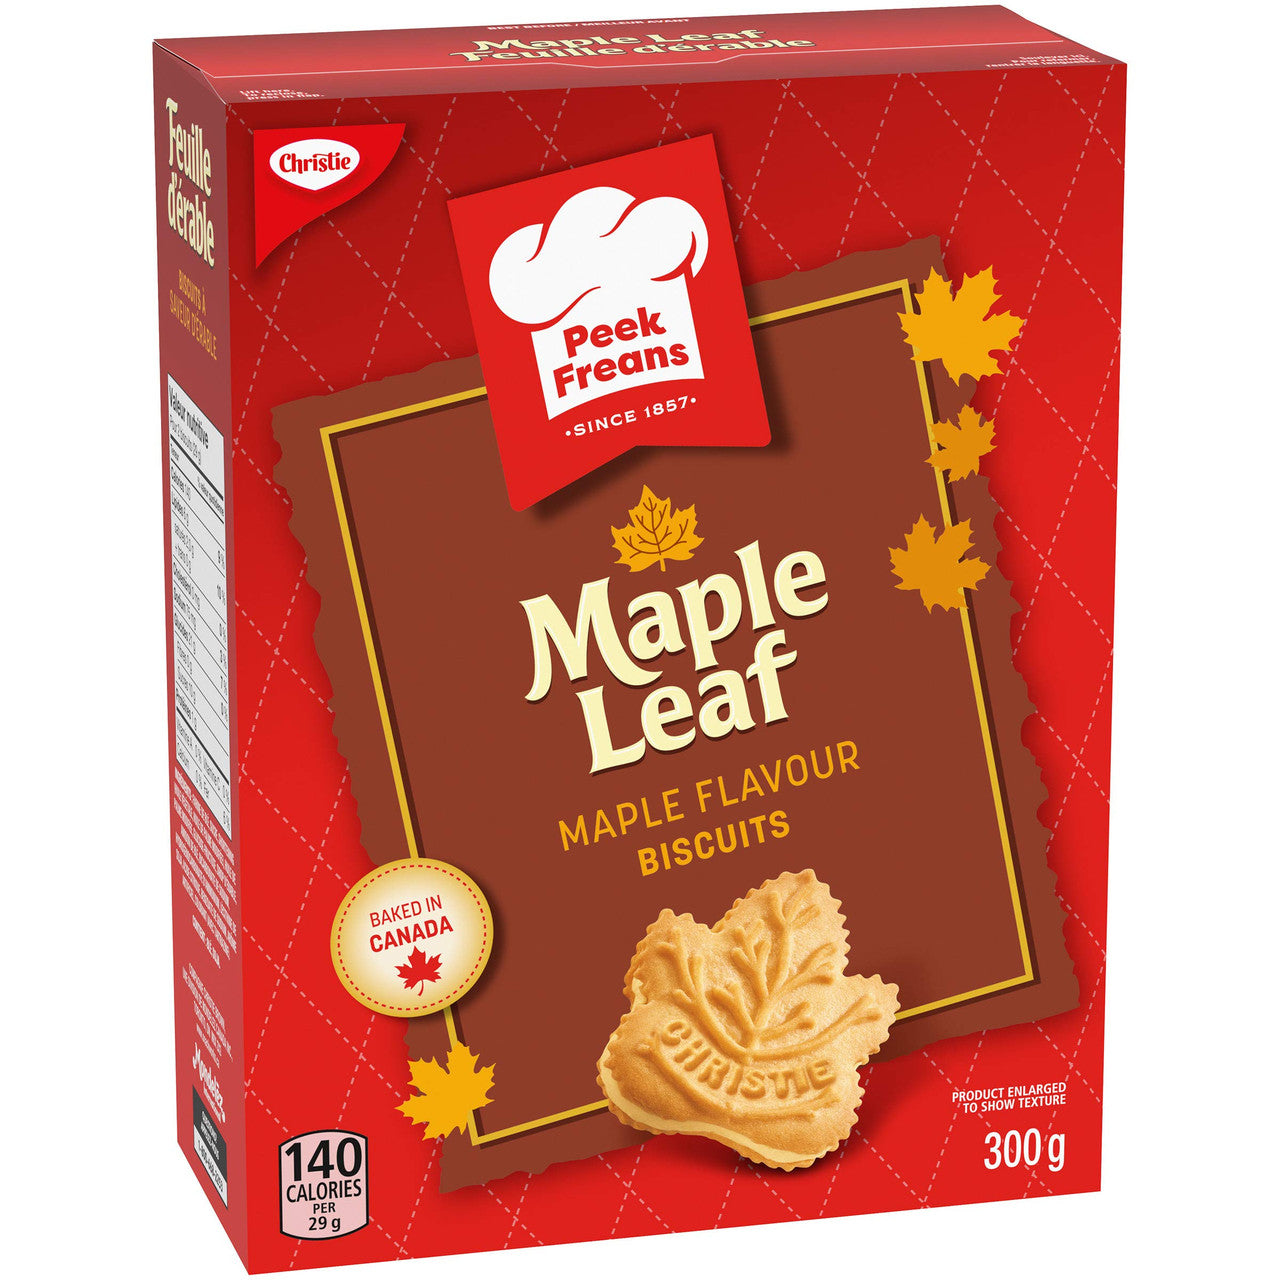 Christie Peek Freans Maple Leaf Cookies 300g /10.6oz {Imported from Canada}